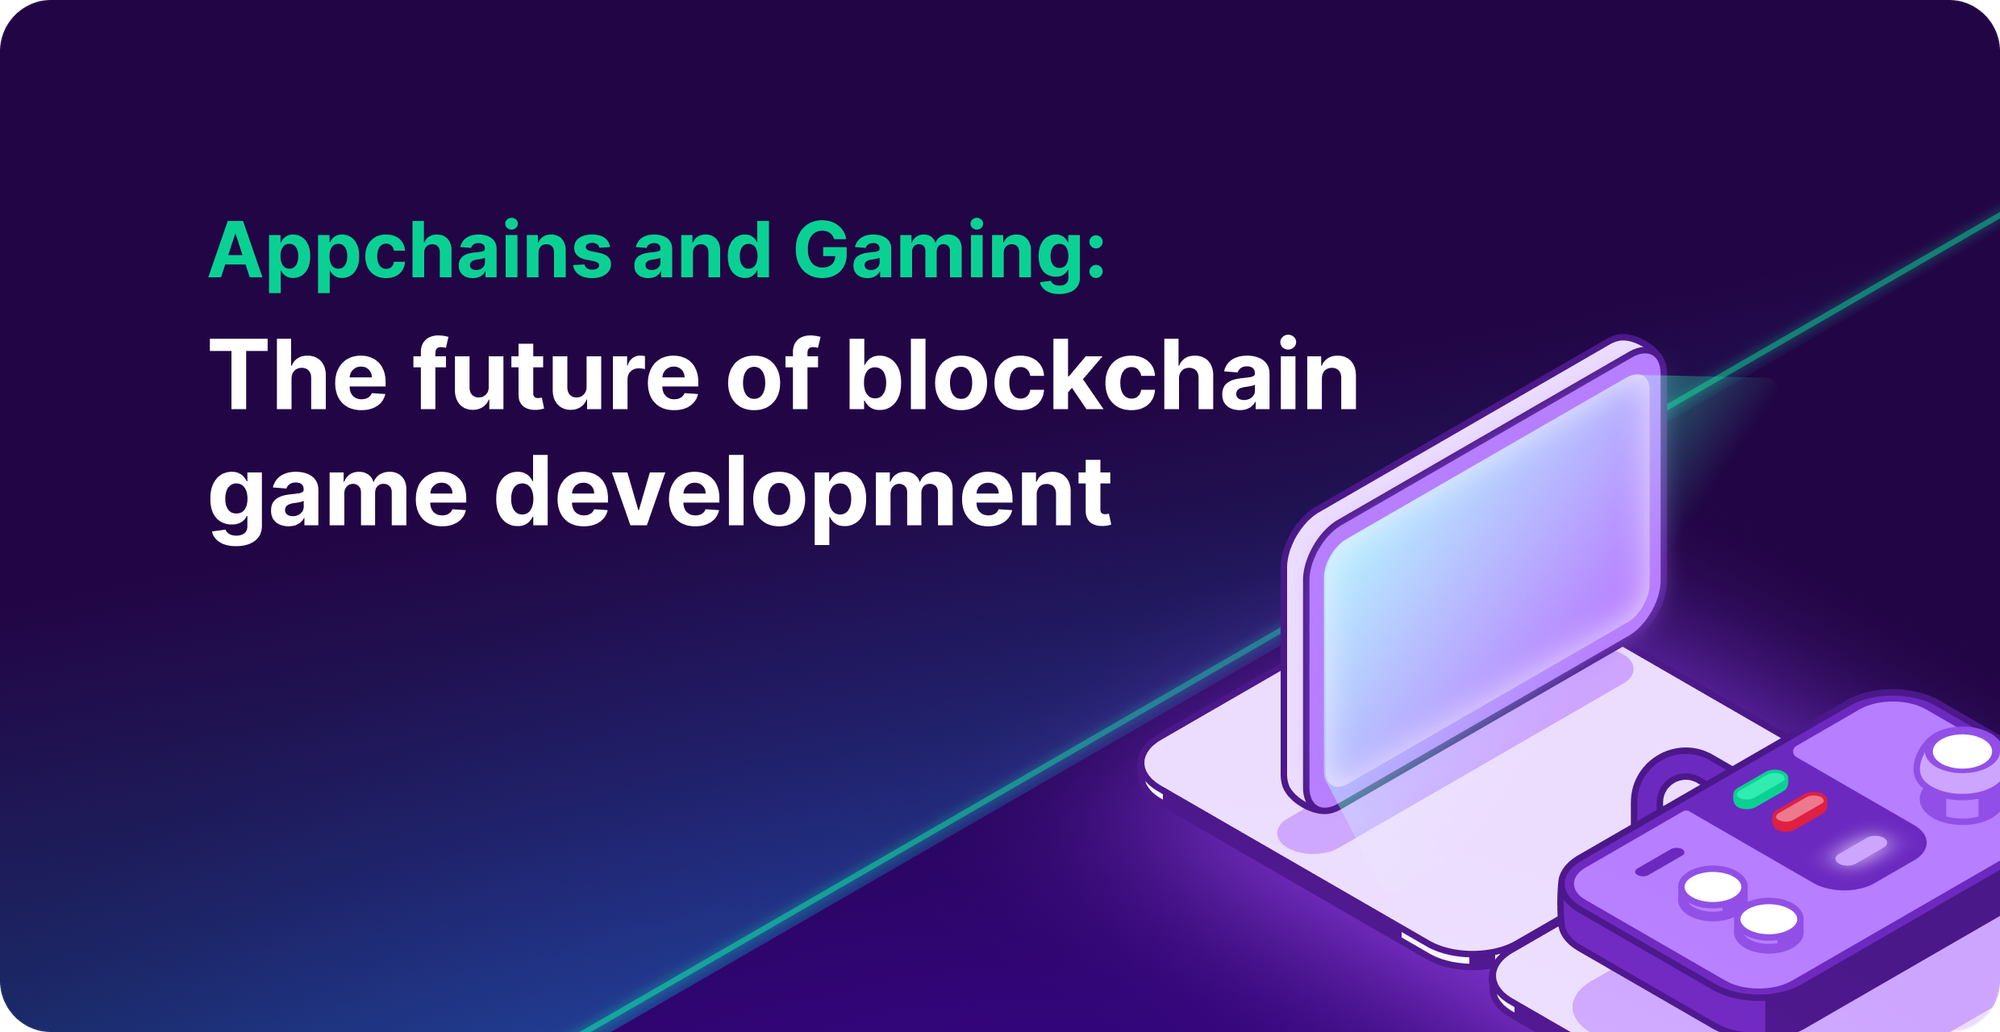 Appchains and Gaming: The Future of Blockchain Game Development